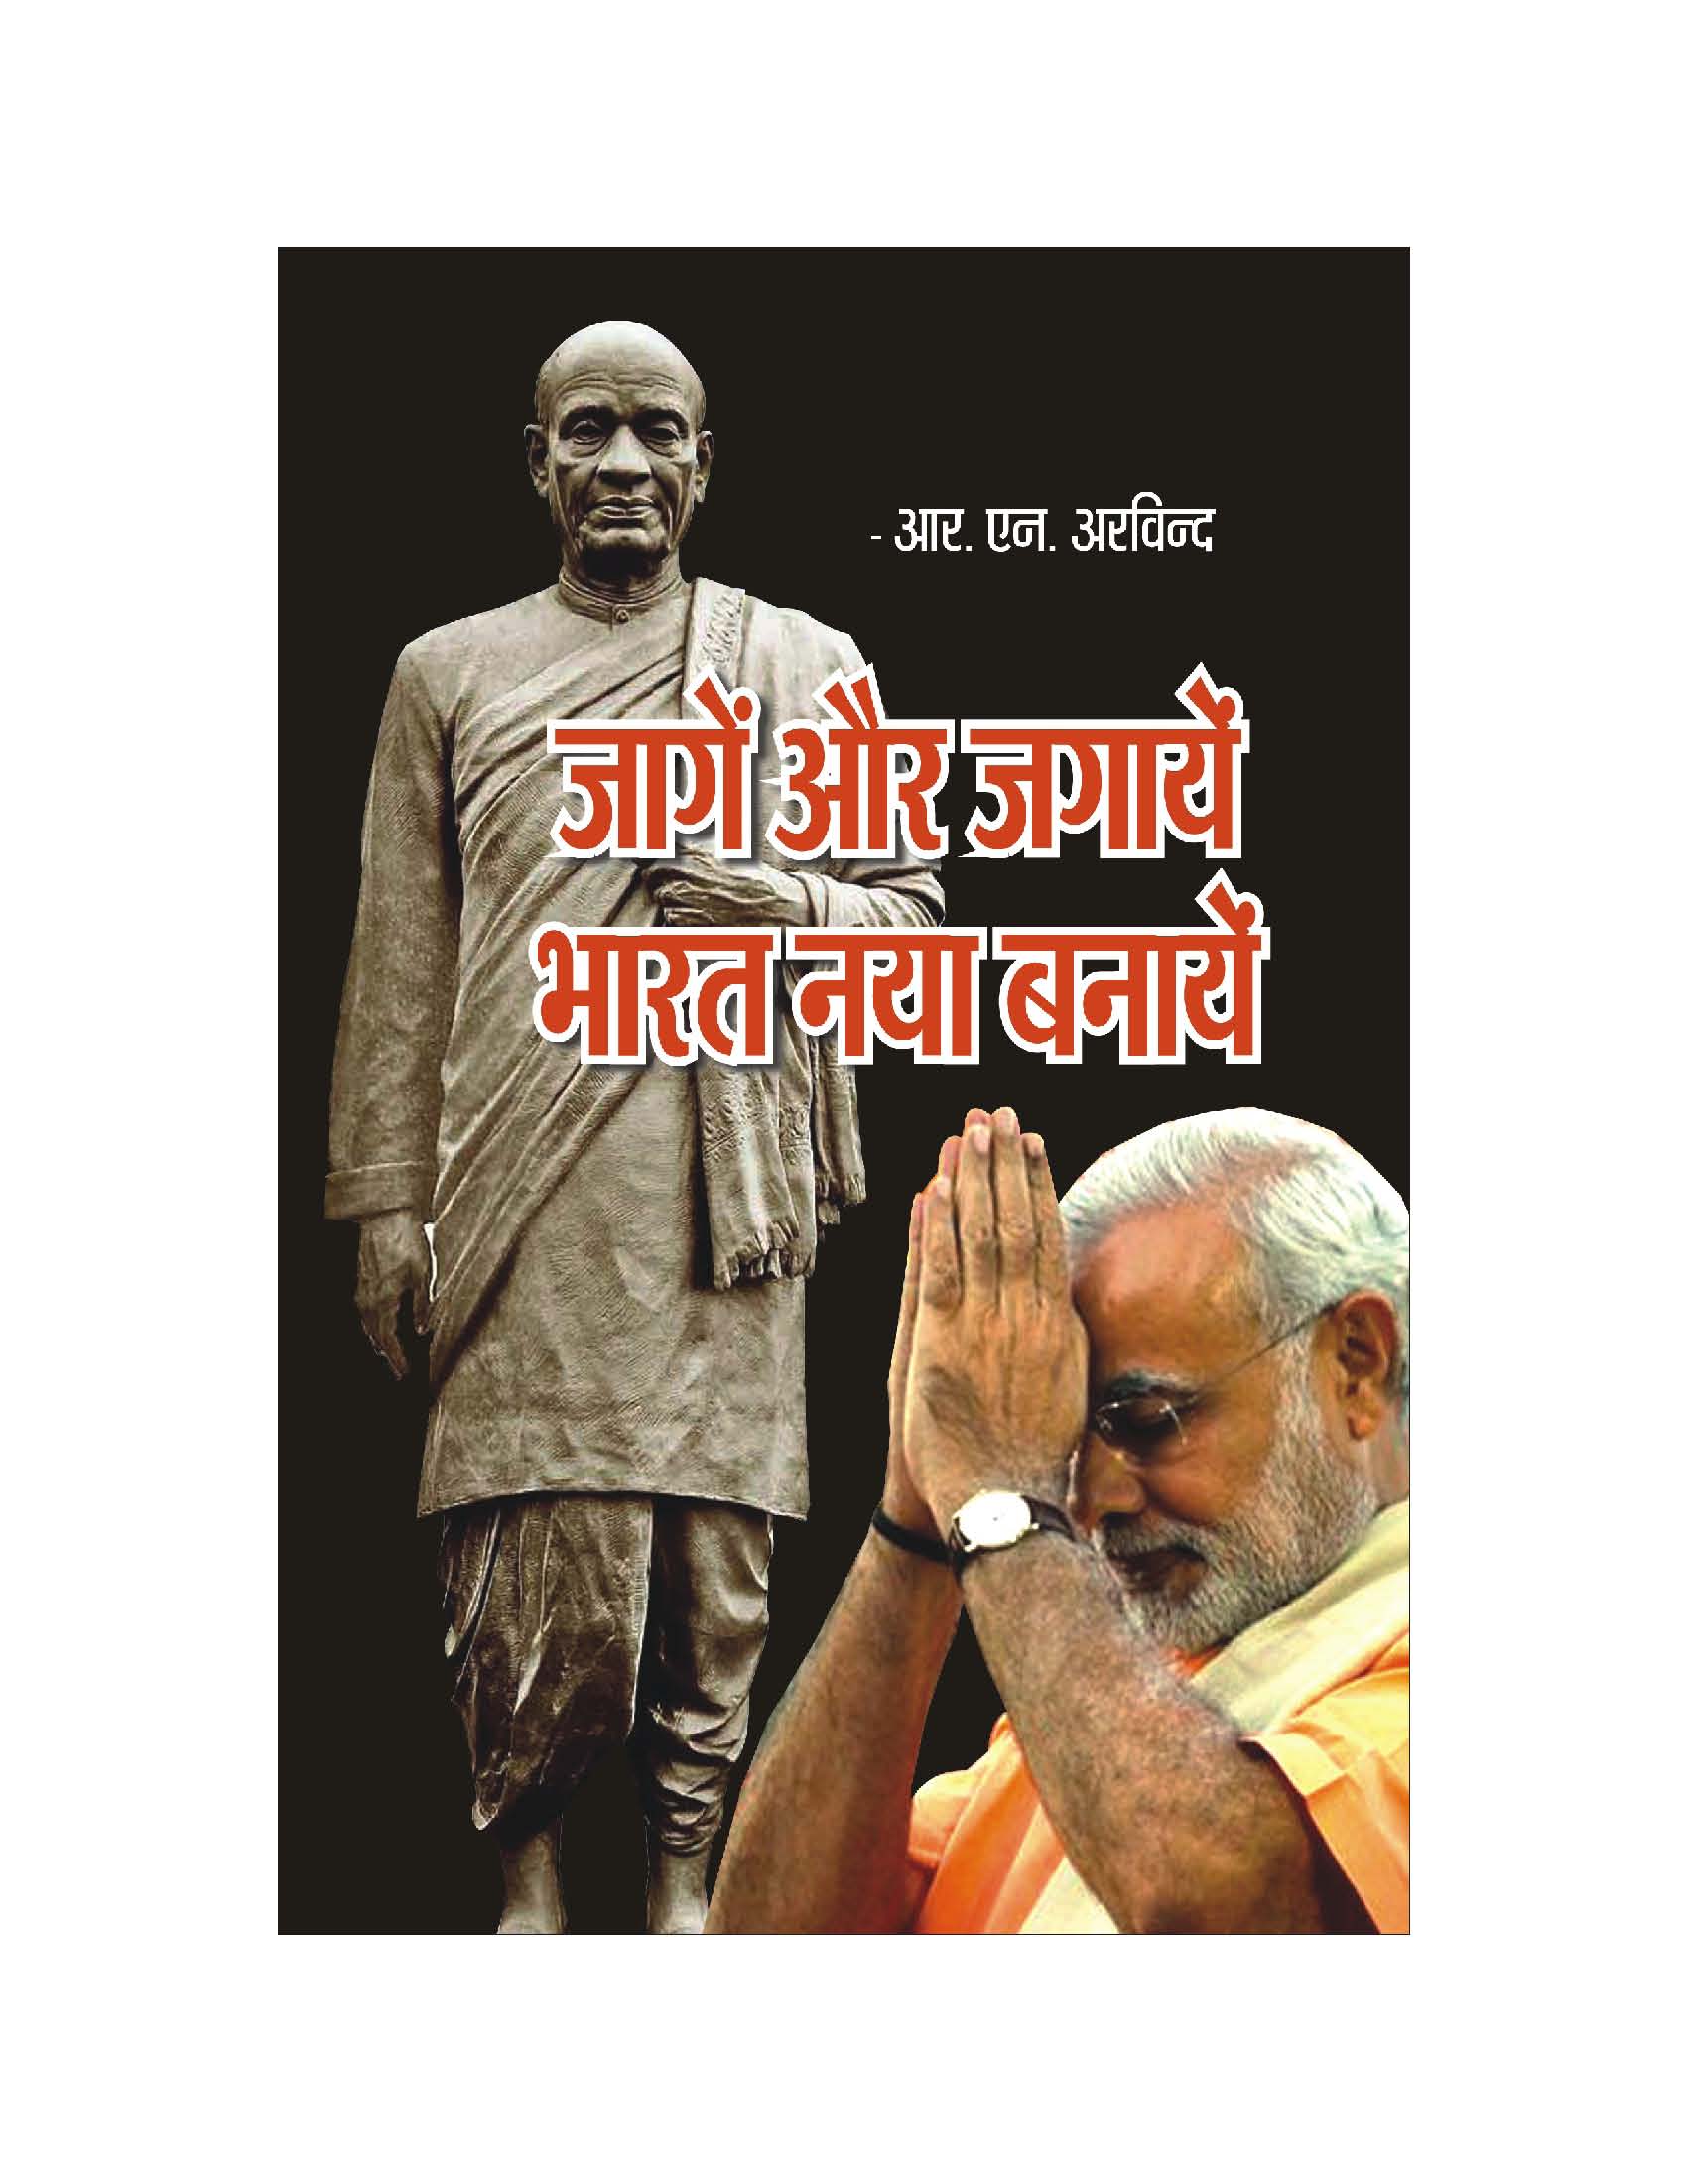 जागें और जगाएं भारत नया बनायें A book on how change is needed in India and how the then Gujarat CM Narendra Modi could bring that much-needed change in India.